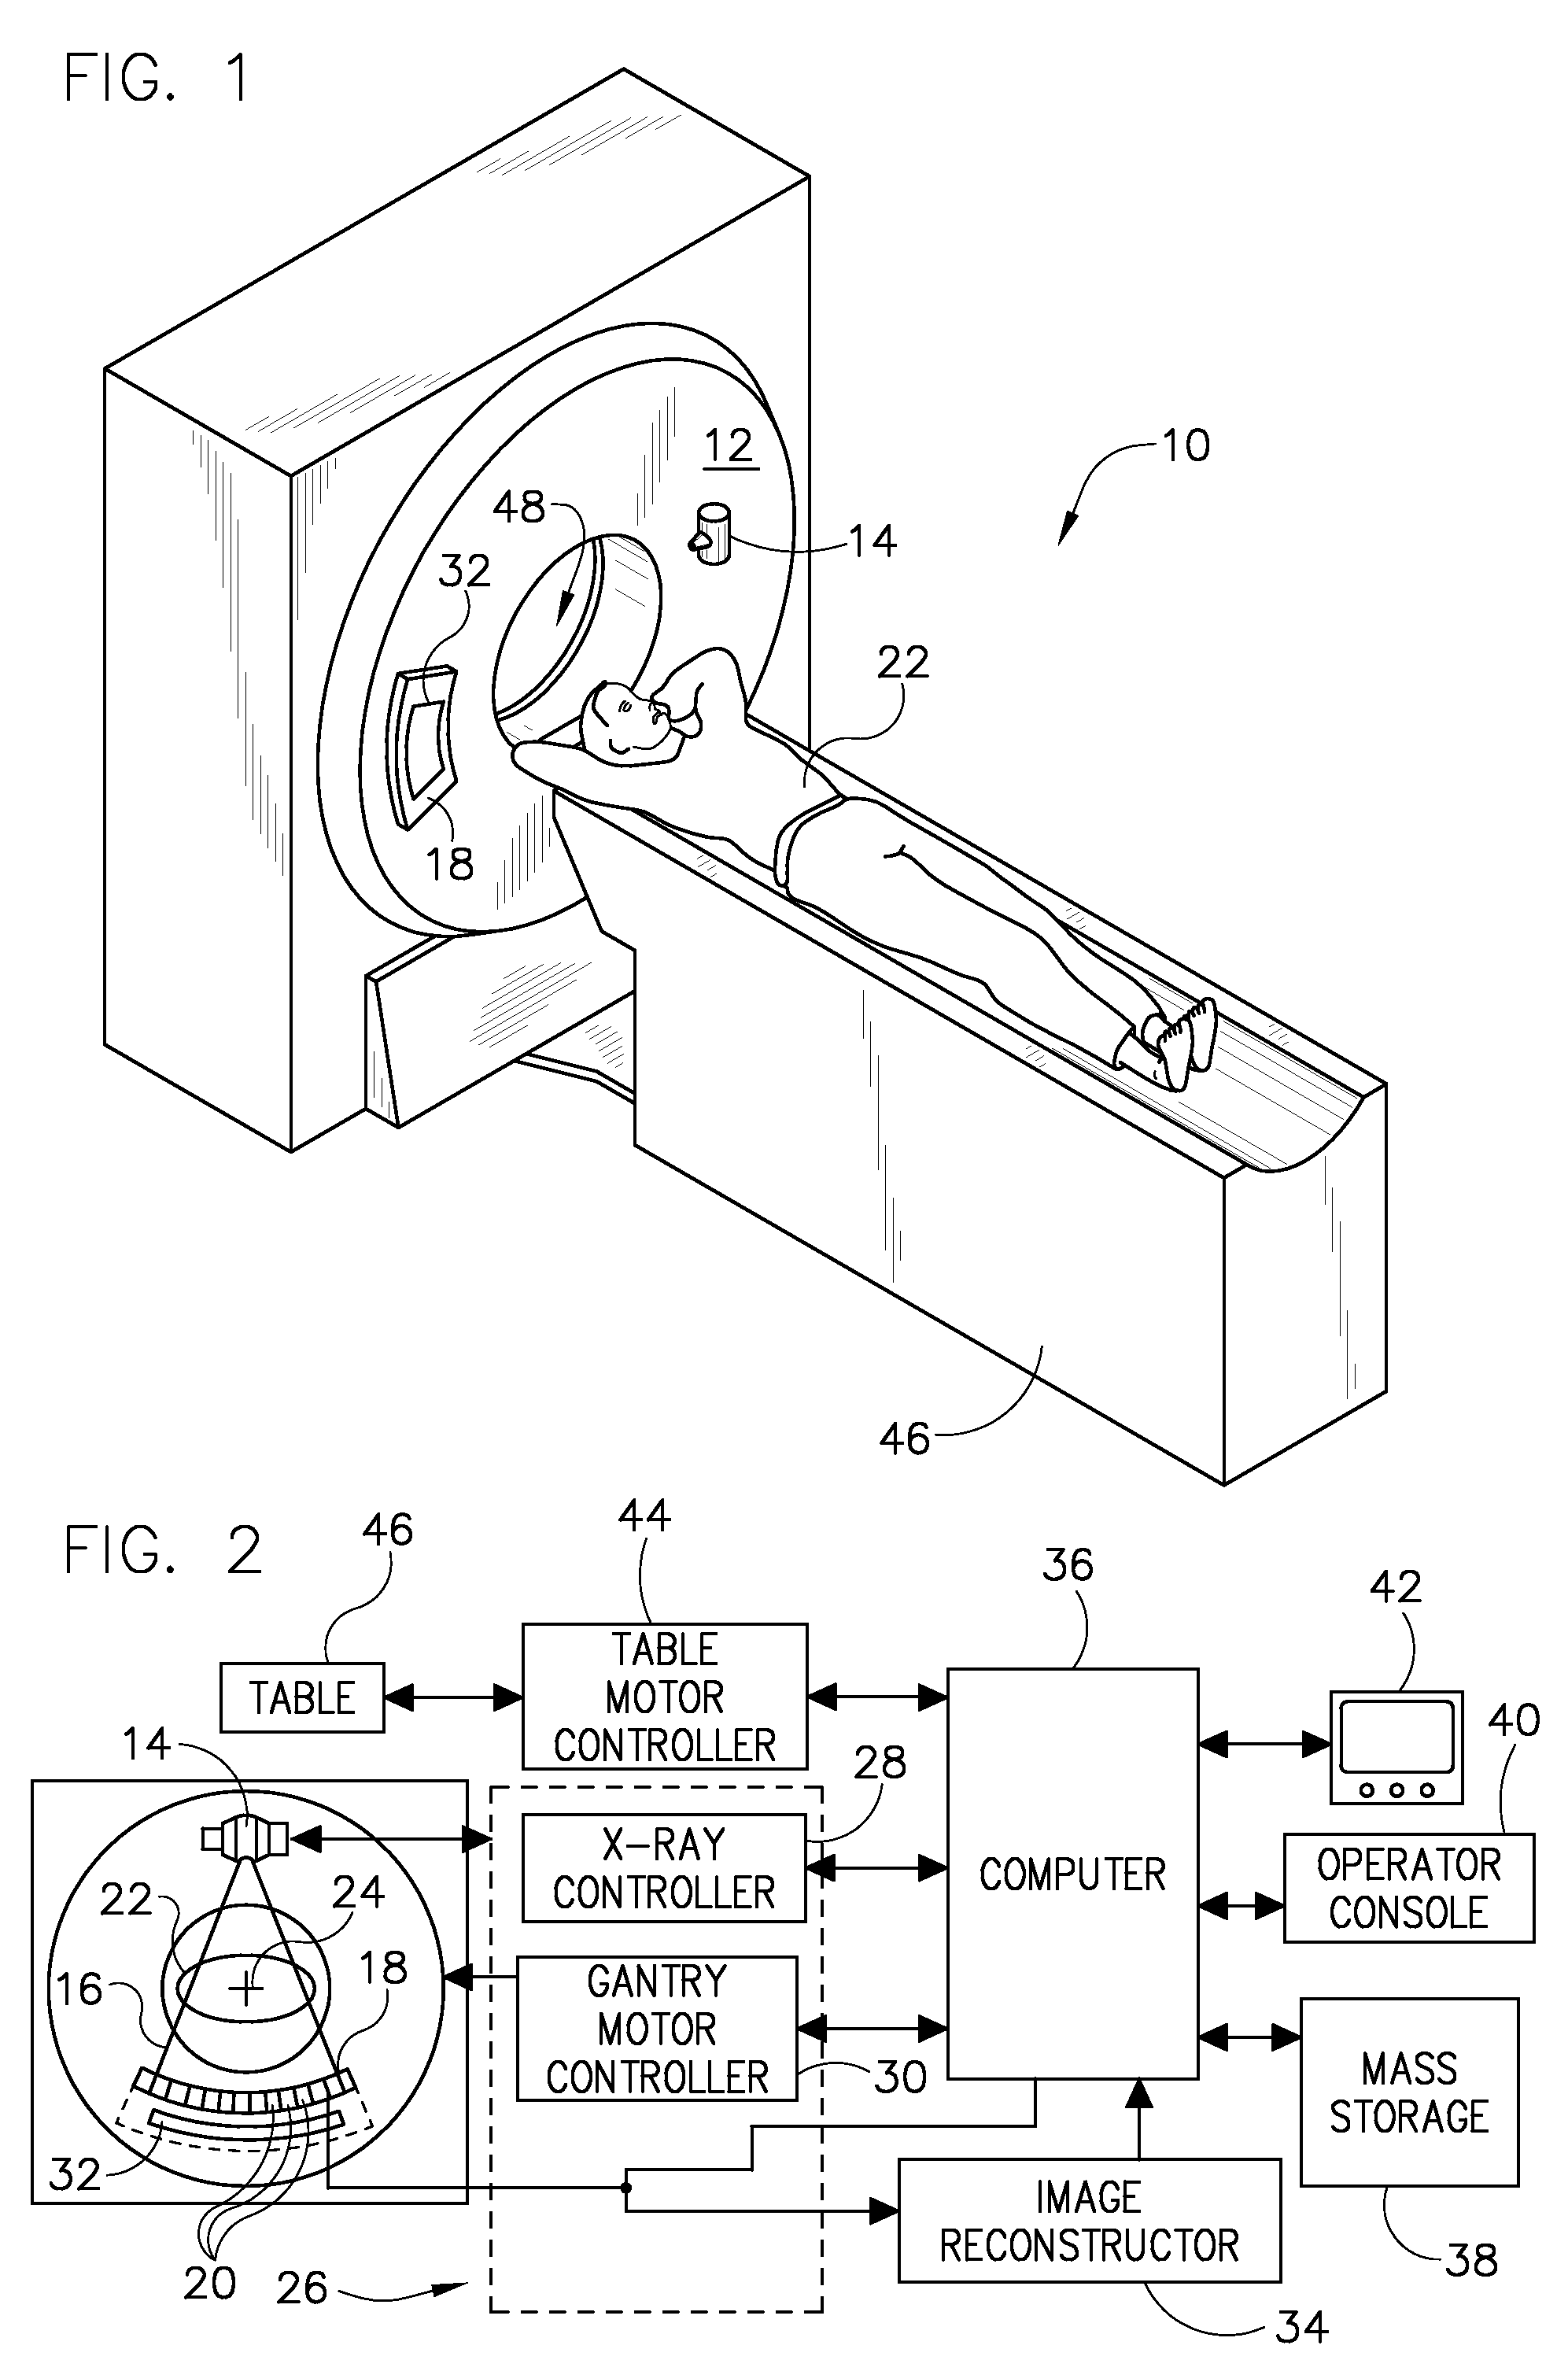 System and method of CT imaging with second tube/detector patching